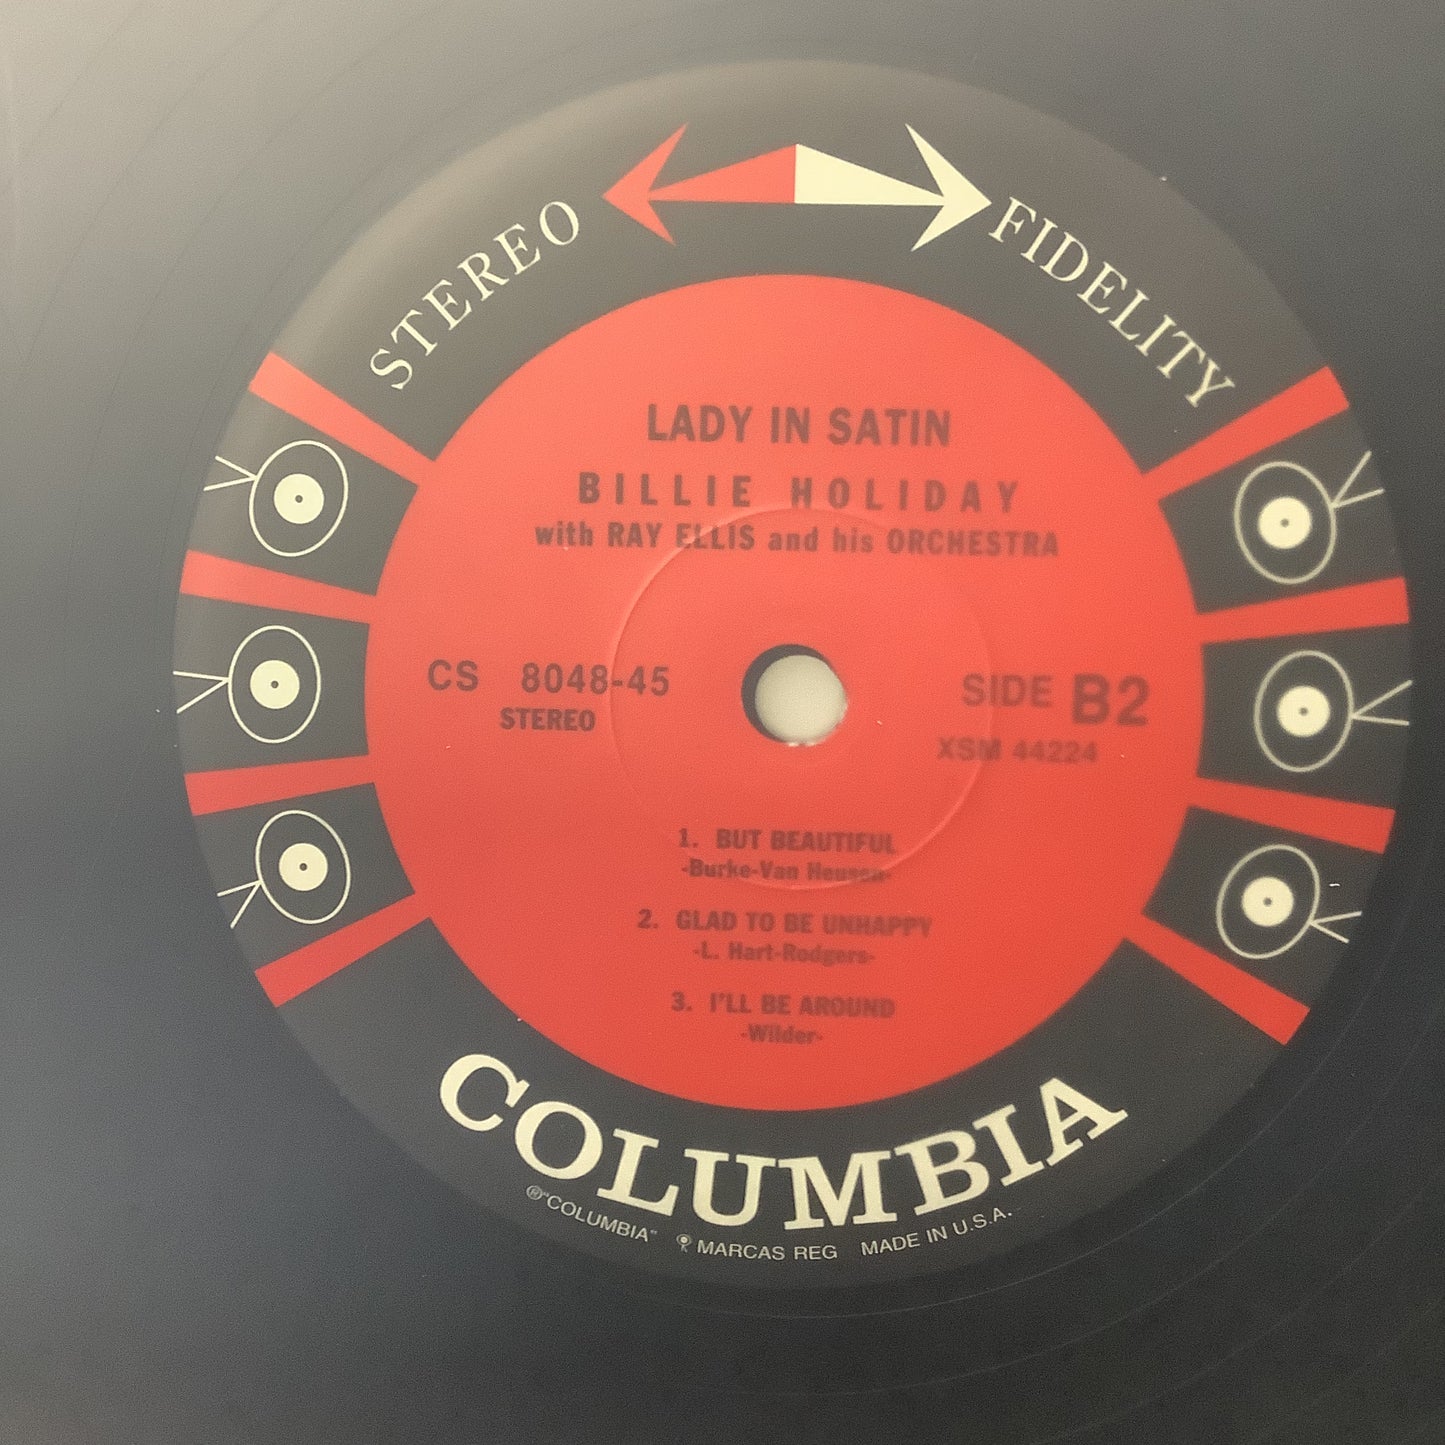 Billie Holiday - Lady in Satin - Classic Records 45 Series LP